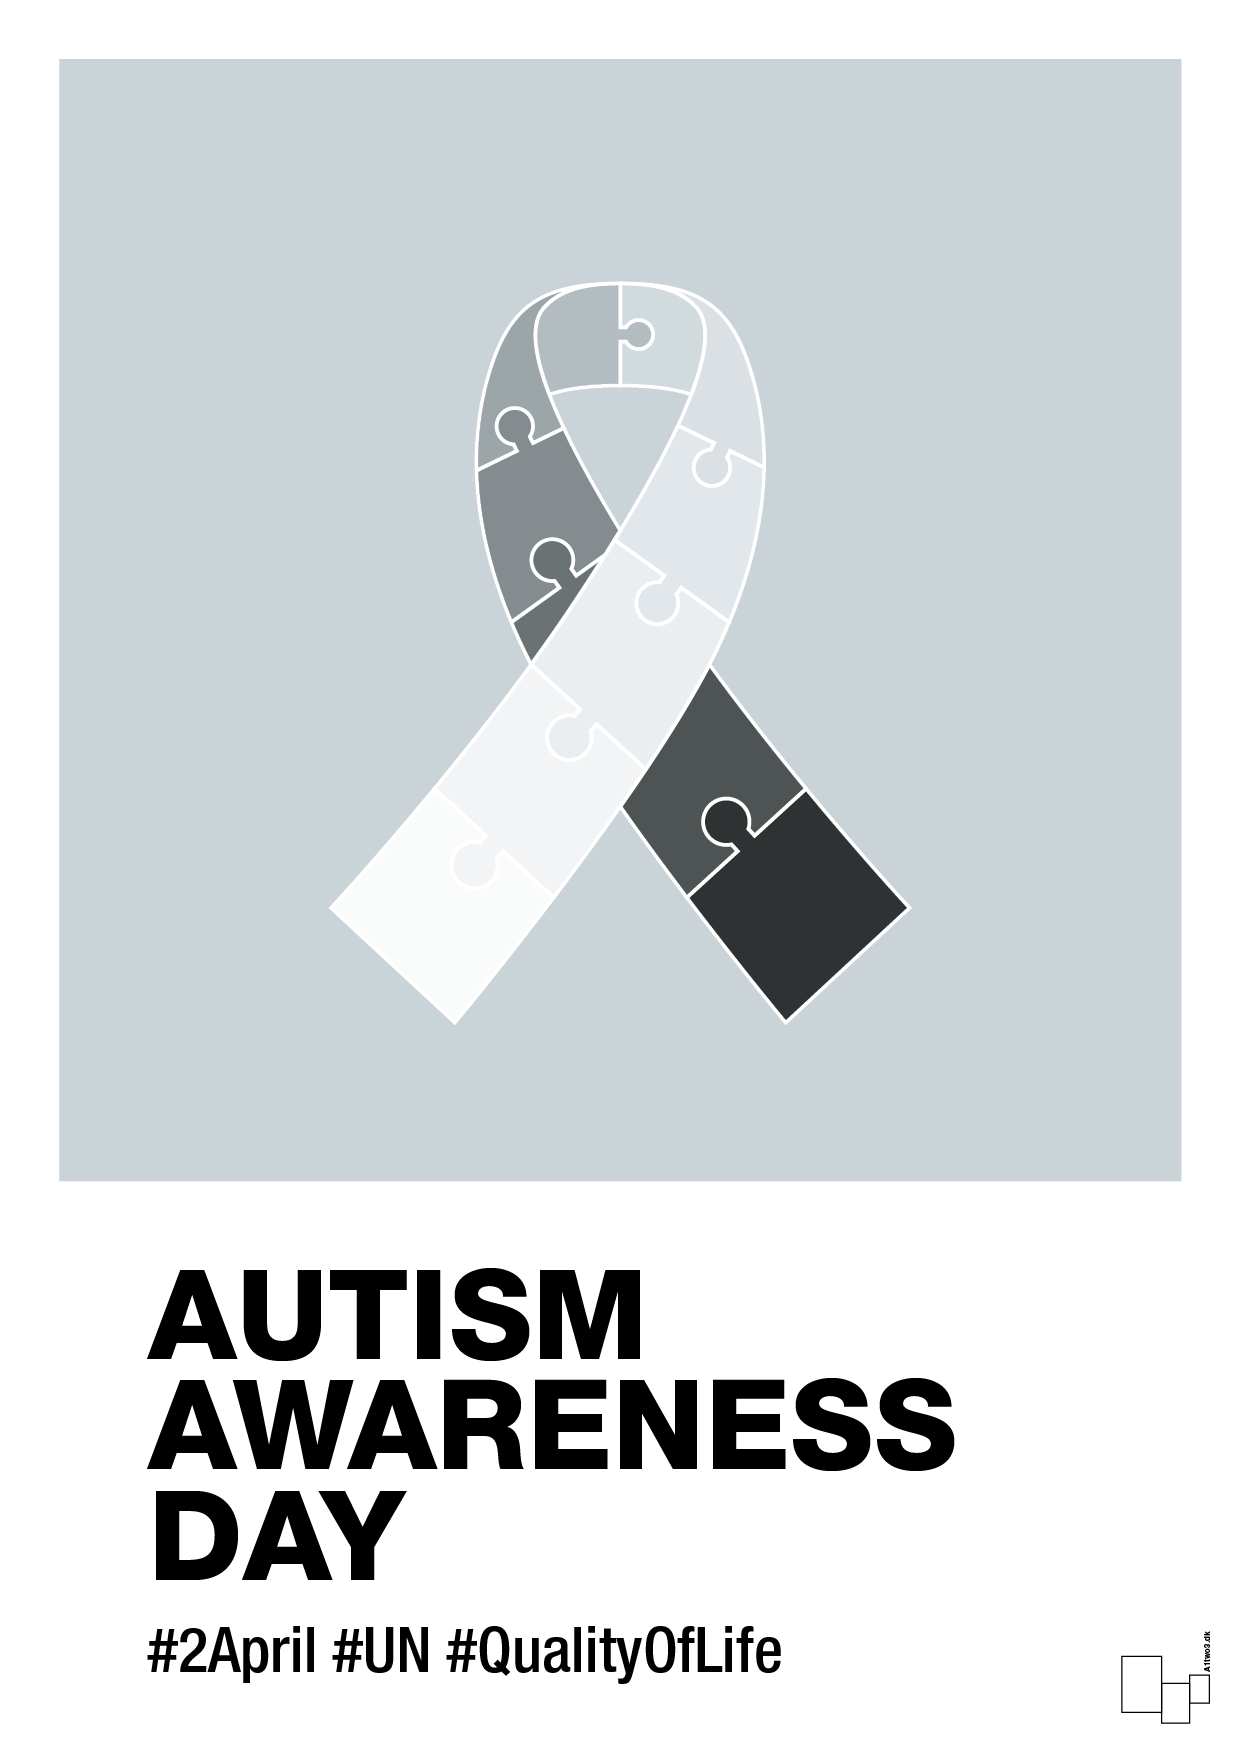 autism awareness day in monocolor - Plakat med Samfund i Light Drizzle